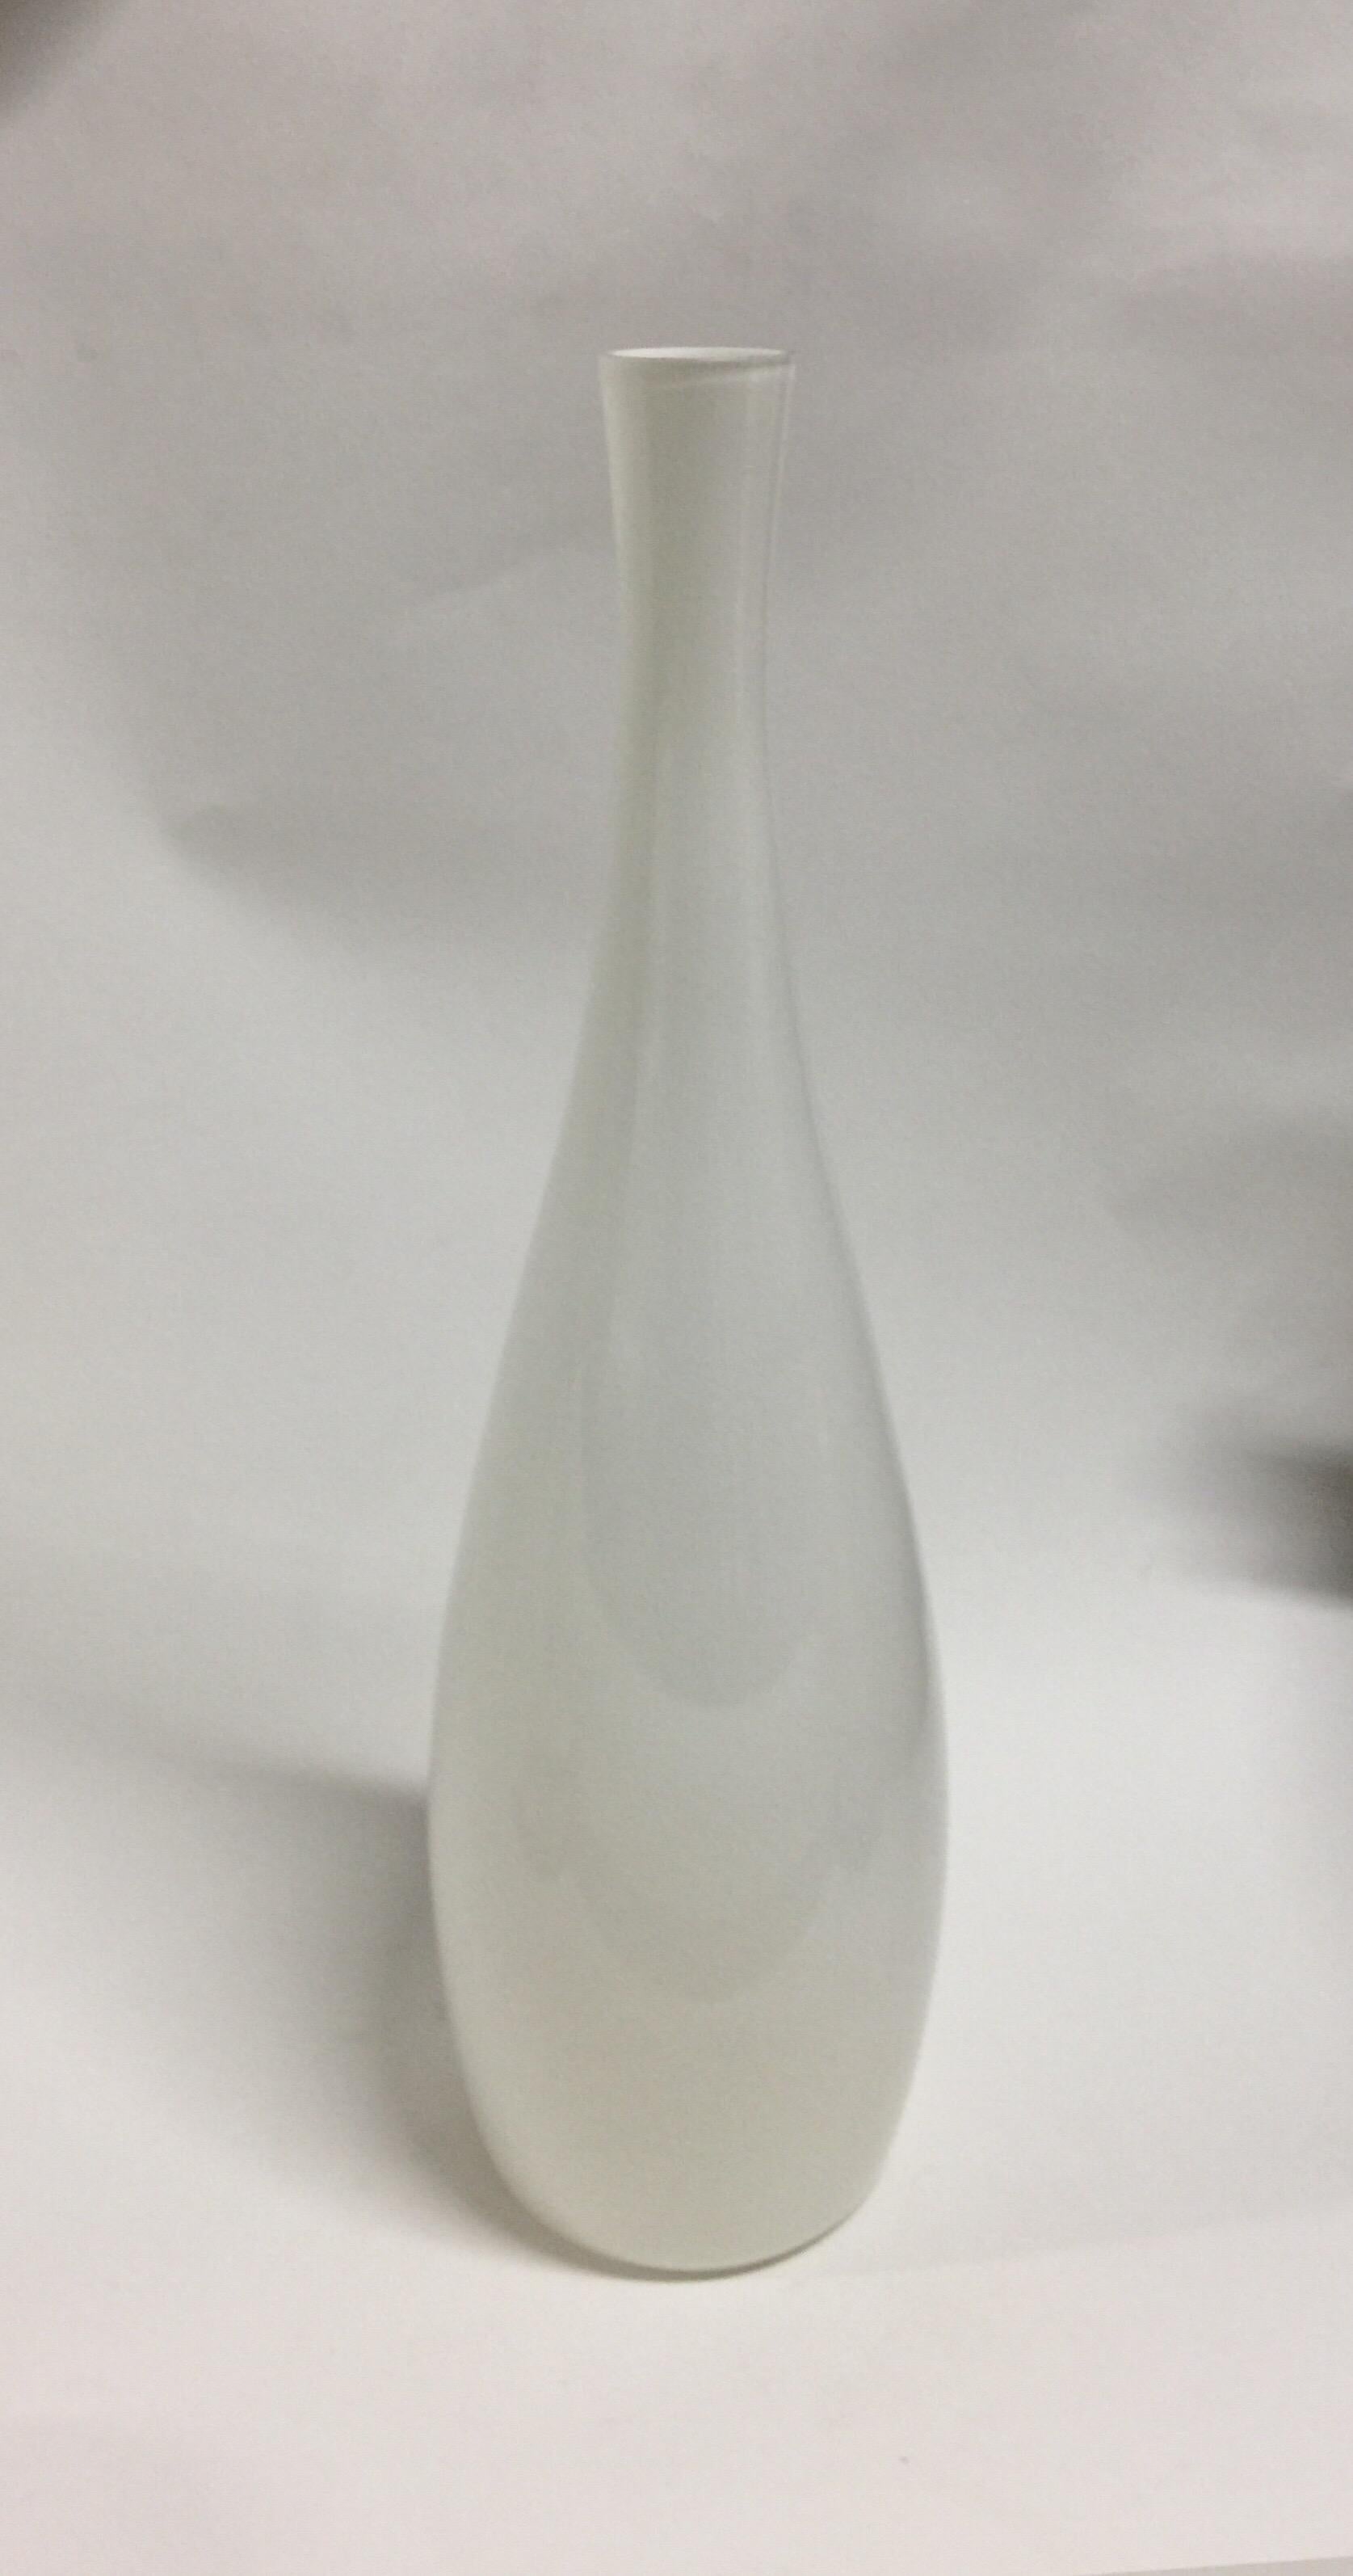 A vintage and tall art glass vase made by Jacob Bang for Kastrup. Denmark, circa 1950.

White. Made of cased glass with a beautiful iridescent quality. Retains partial original label on base. Overall in good condition; please note that top of vase